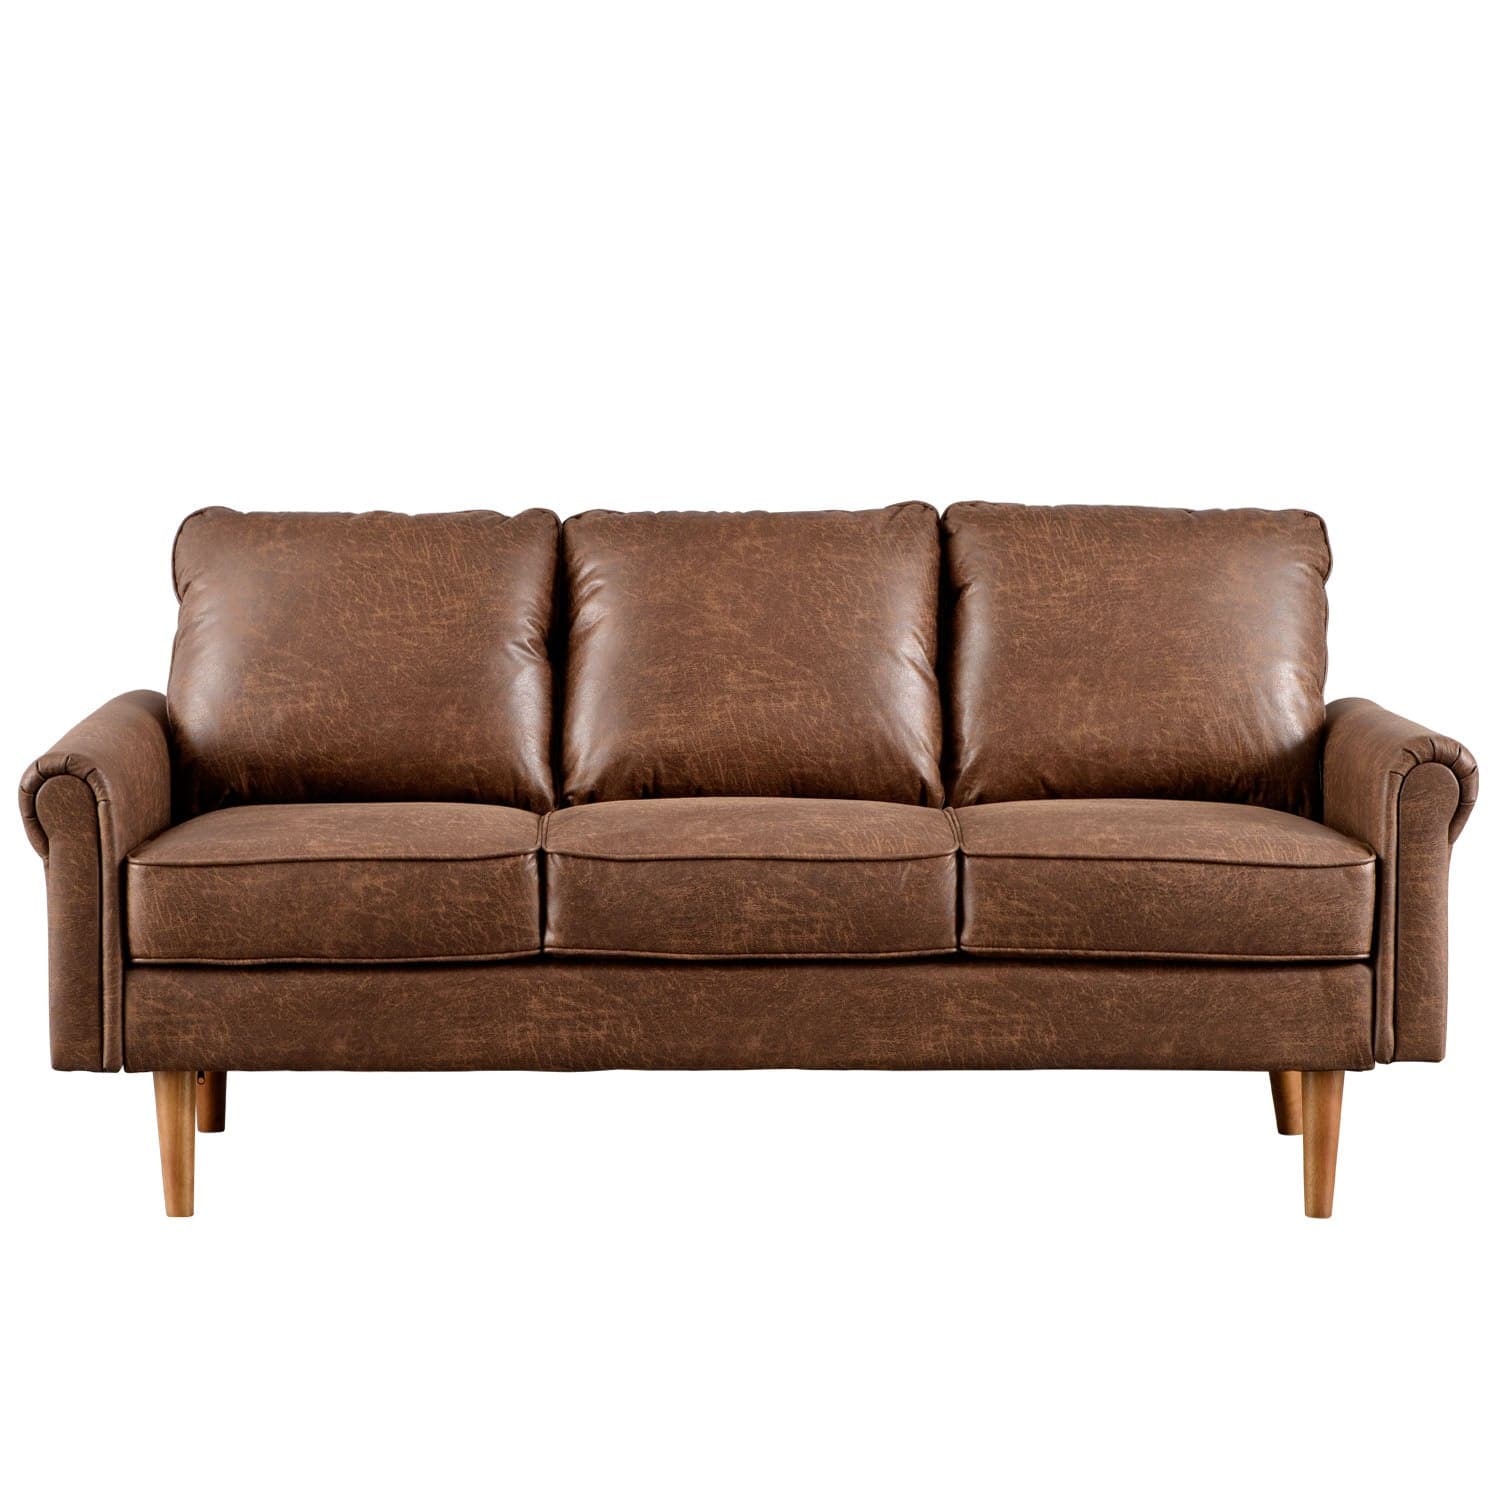 Ovios Living Room 73.6'' Wide Suede or Line Fabric Sofa, 6 Colors